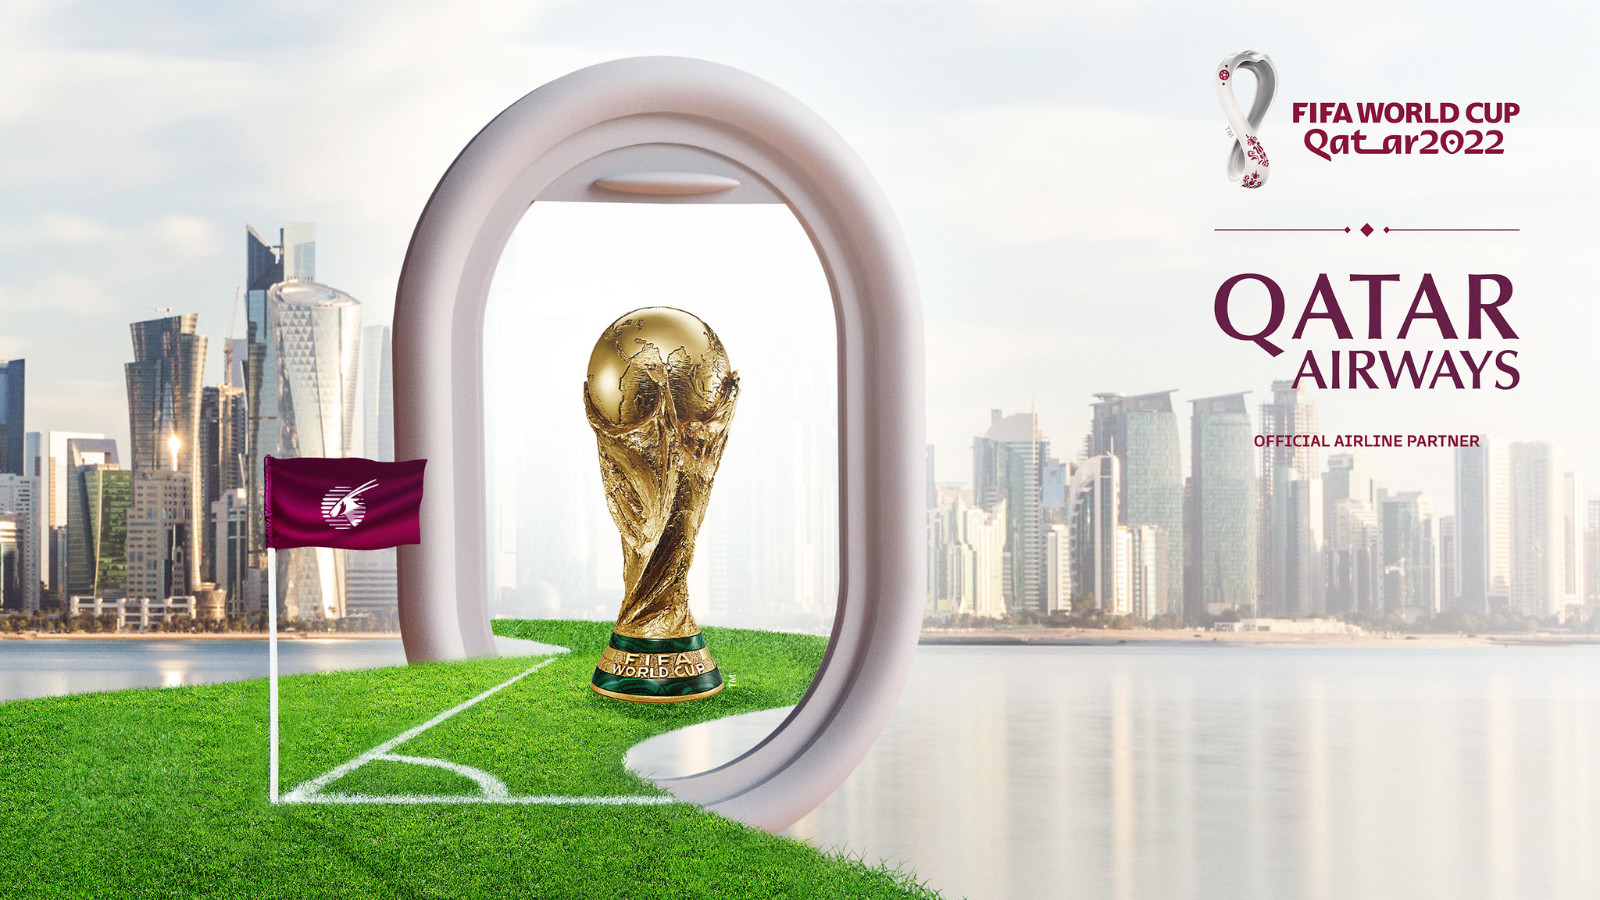 Live the FIFA World Cup 2022 with Qatar Airways